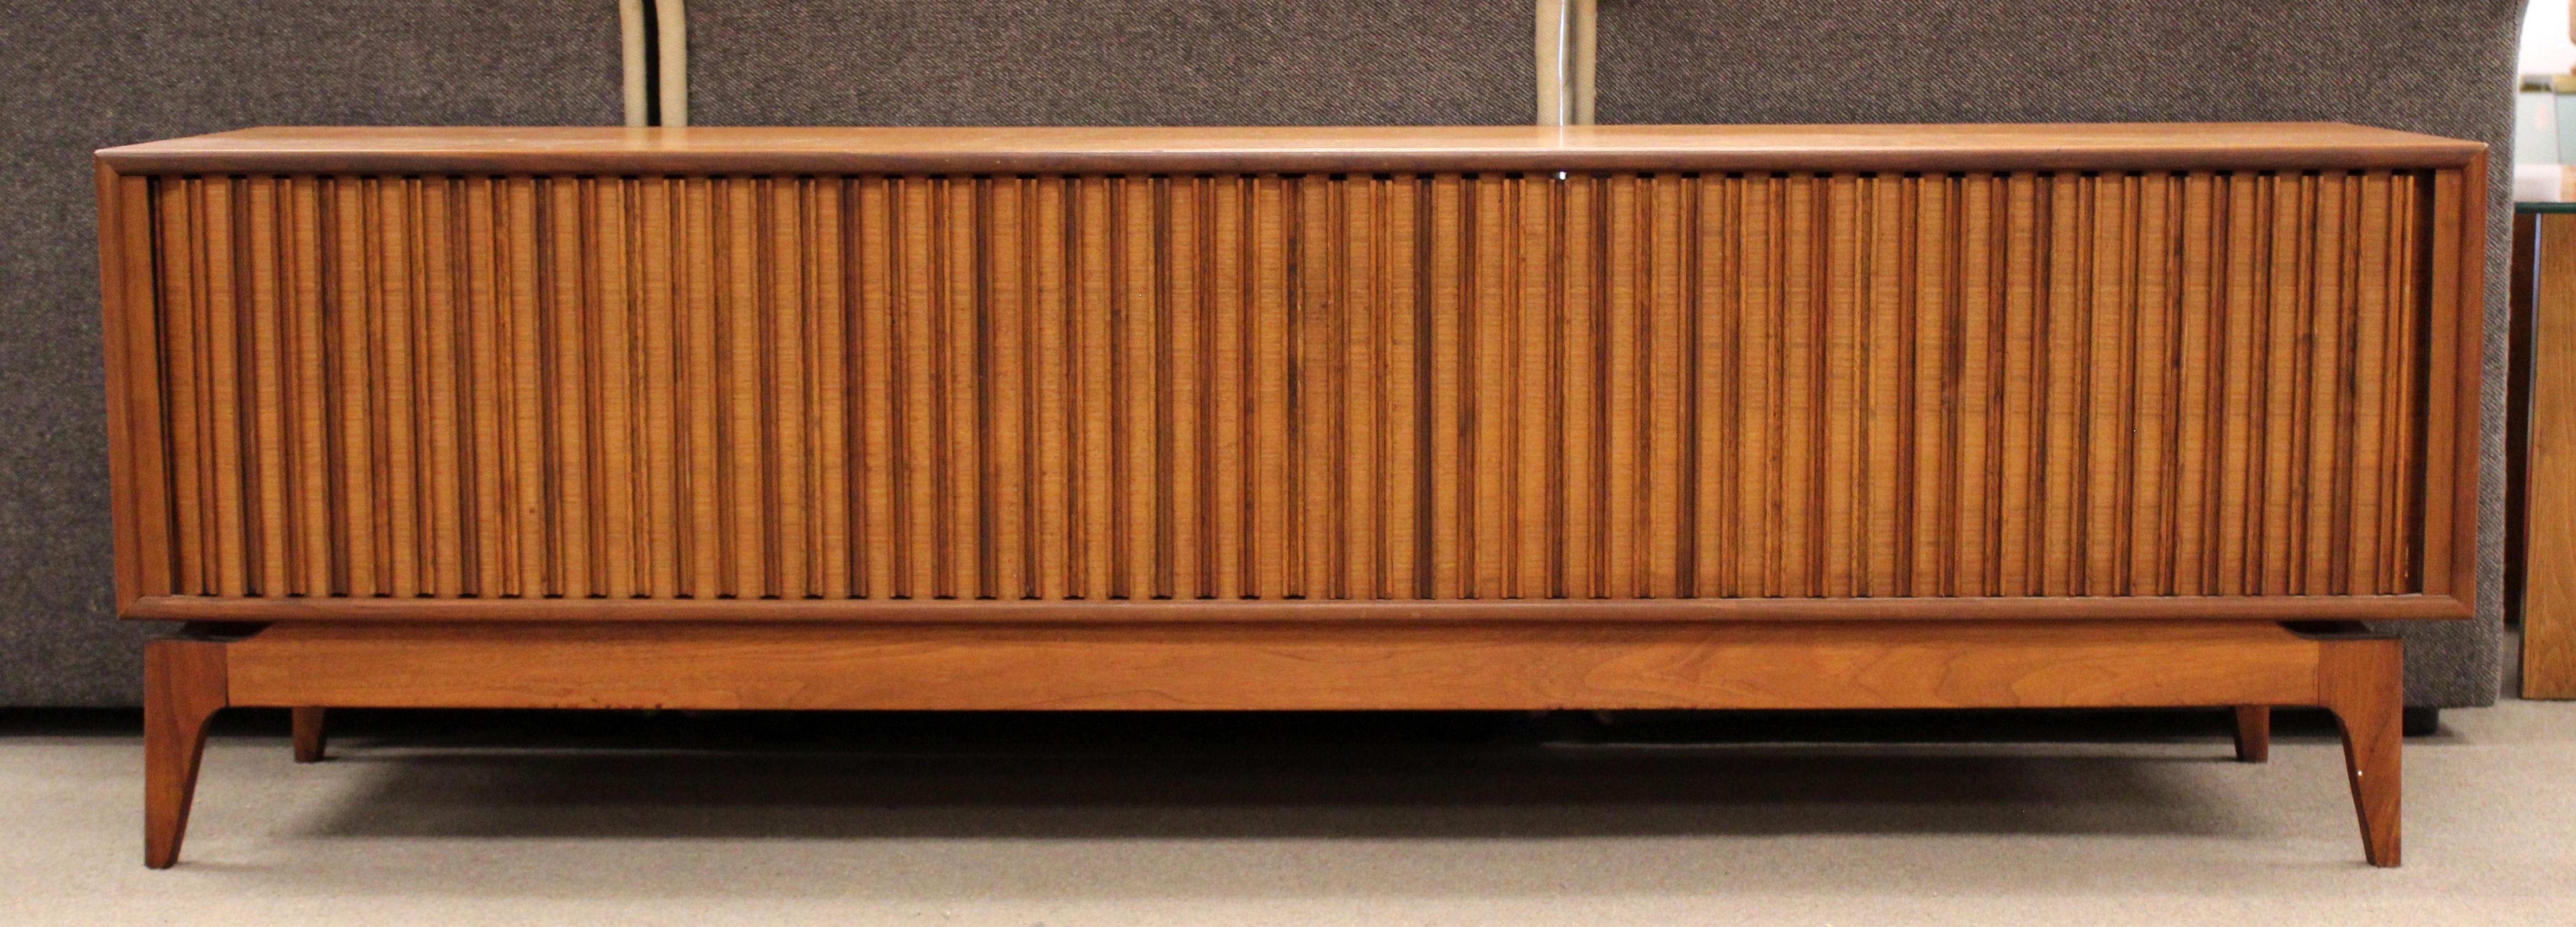 For your consideration is a terrific, walnut wood credenza sideboard, with tambour doors, by Barzilay, circa 1960s. In excellent vintage condition. The dimensions are 72